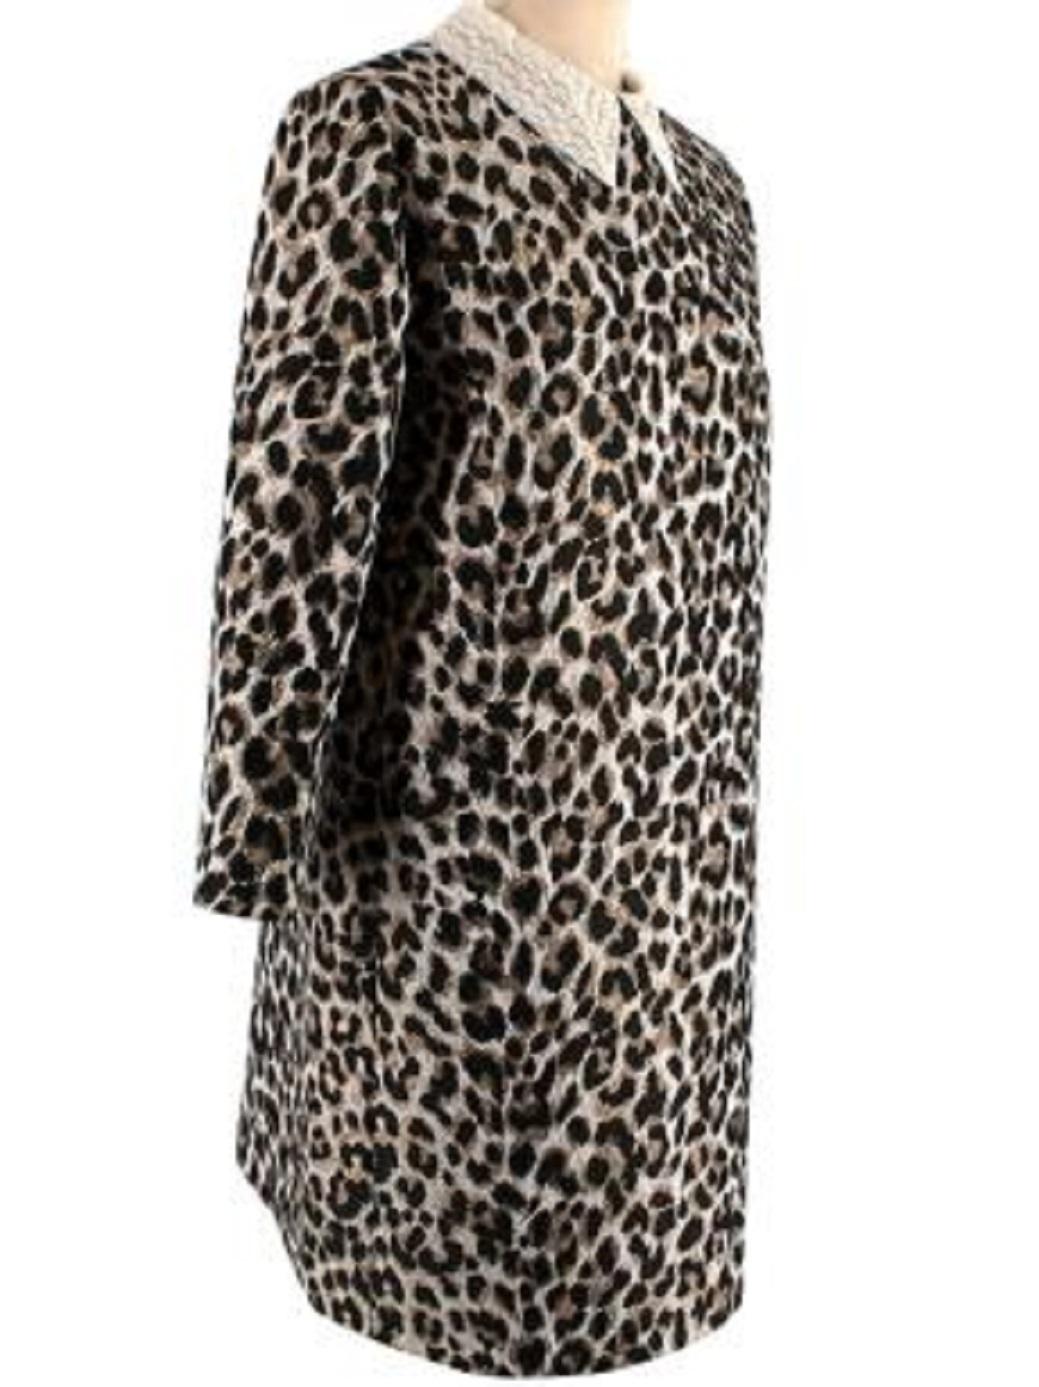 Christian Dior Lace Collar Leopard Dress

- Lace collar
- 3/4 sleeves
- Leopard print throughout
- Fully lined
- Concealed zip fastening along the back
- Straight fit

Material
100% Silk
Lining: 100% Silk
Other: 90% Cotton, 10% Polyamide

Dry clean